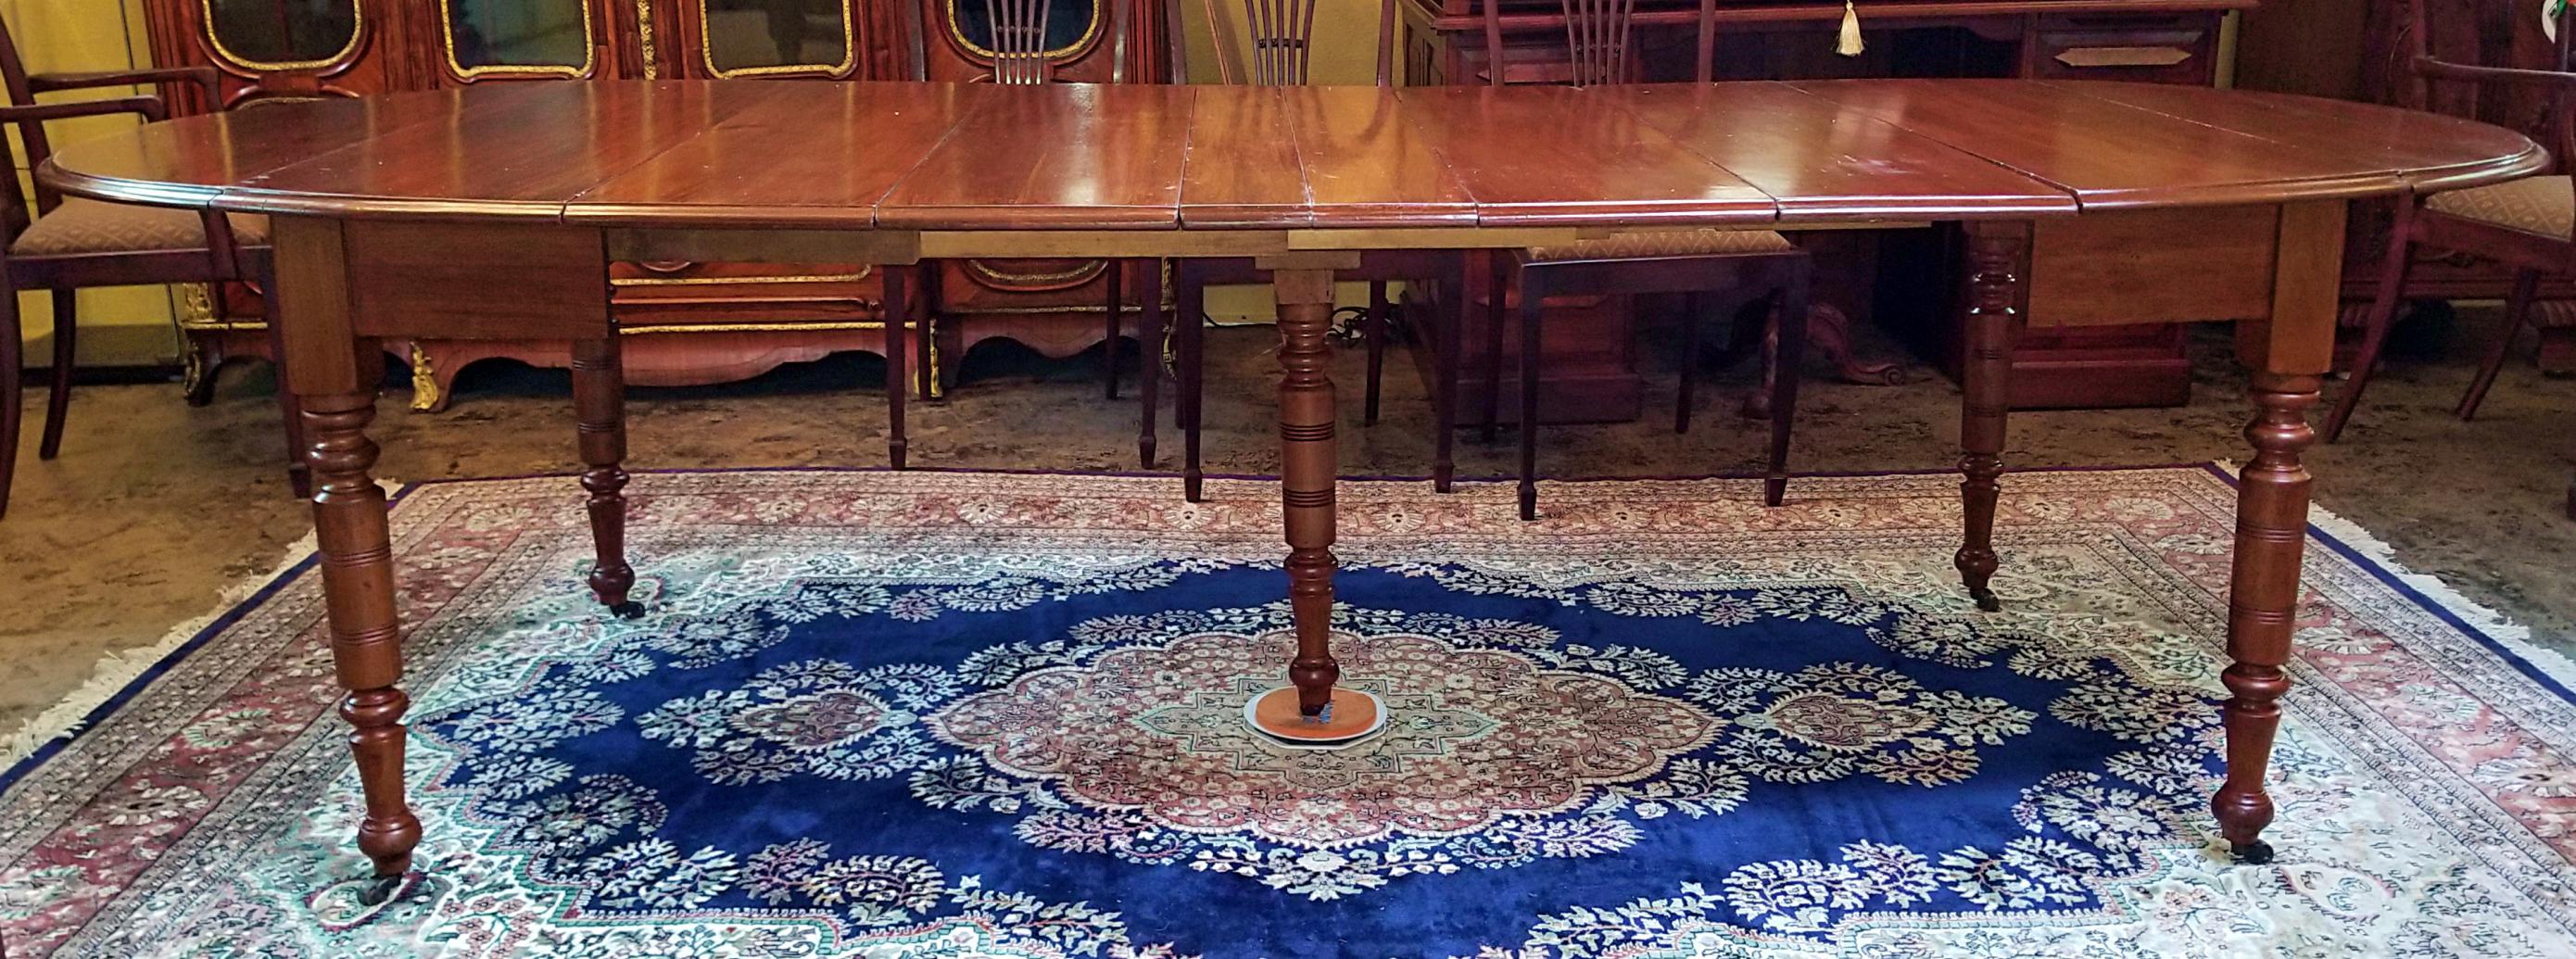 early american dining table